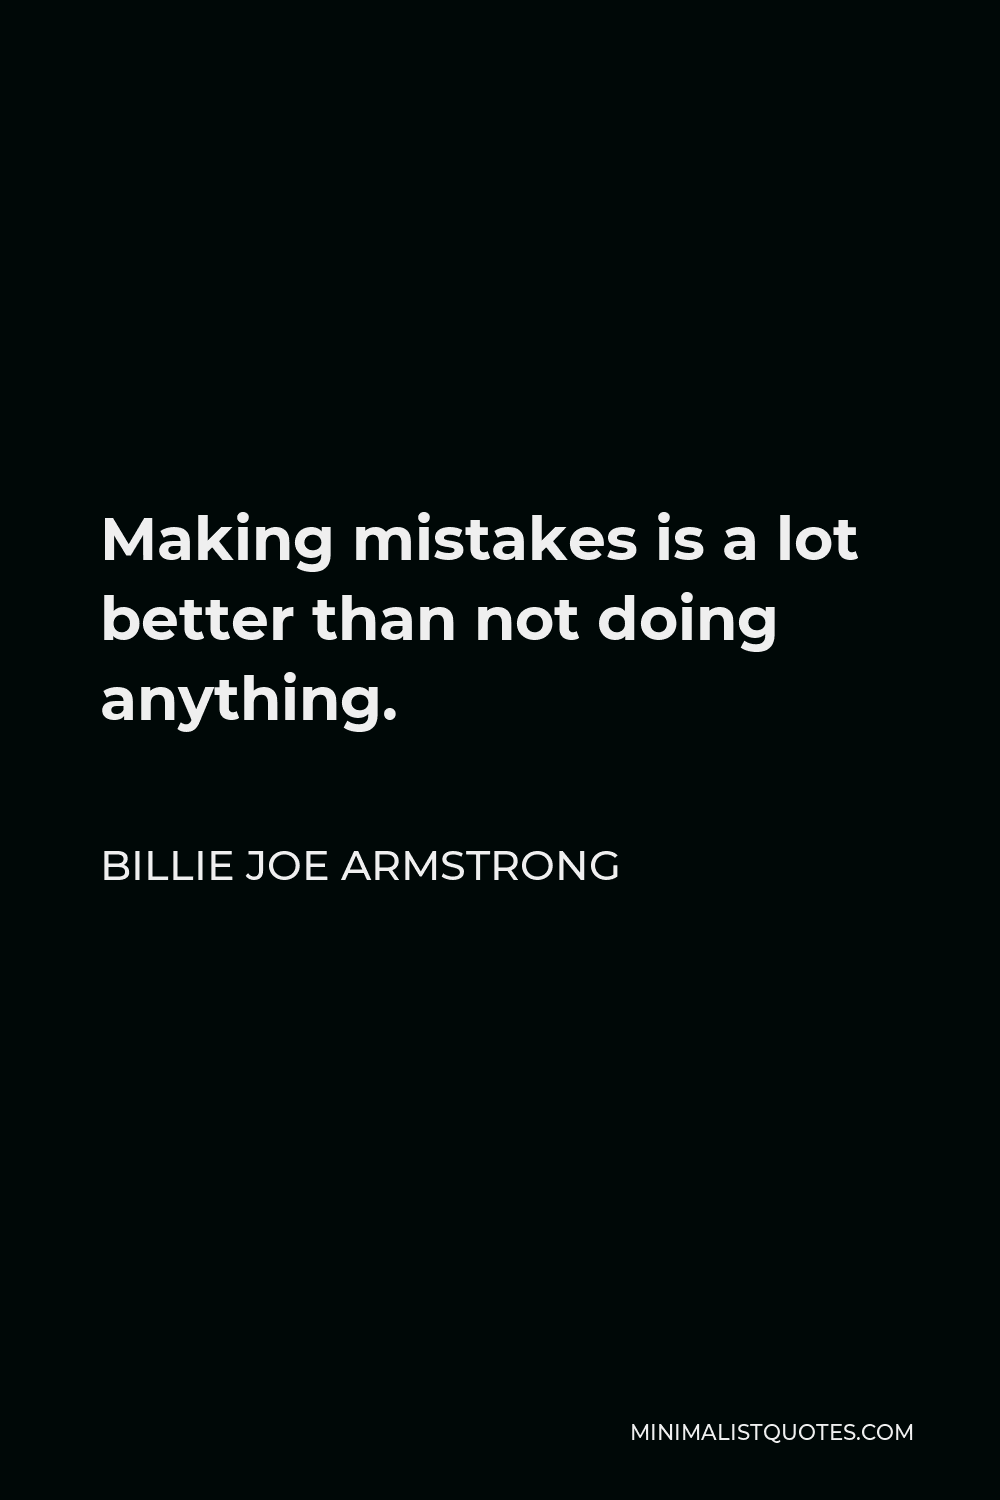 Billie Joe Armstrong Quote - Making mistakes is a lot better than not doing anything.